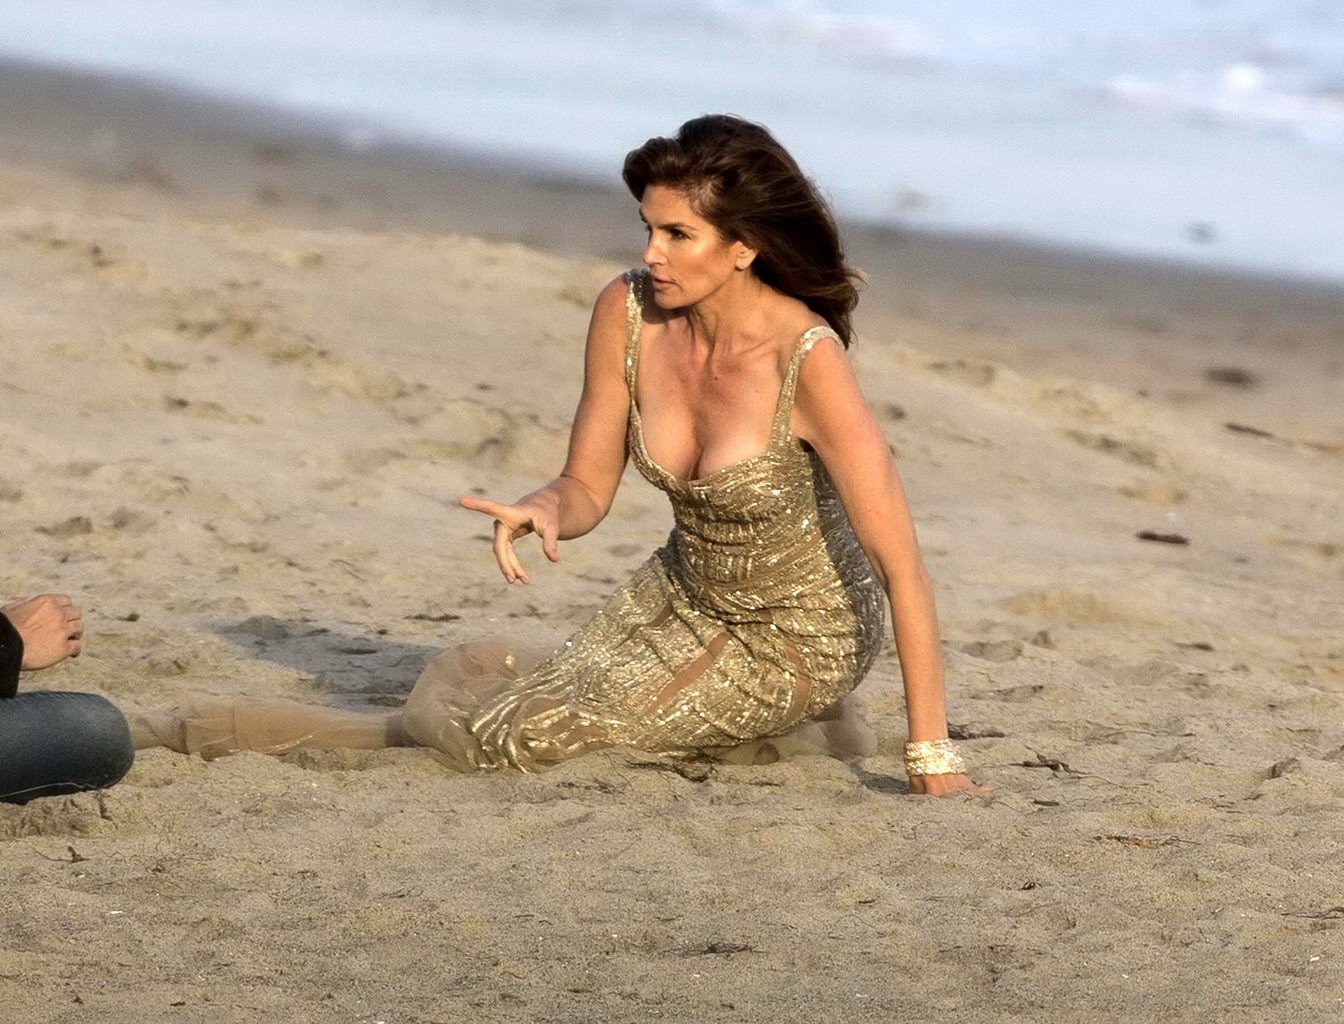 Cindy Crawford braless wearing a see through dress at the photoshoot in Malibu #75168969